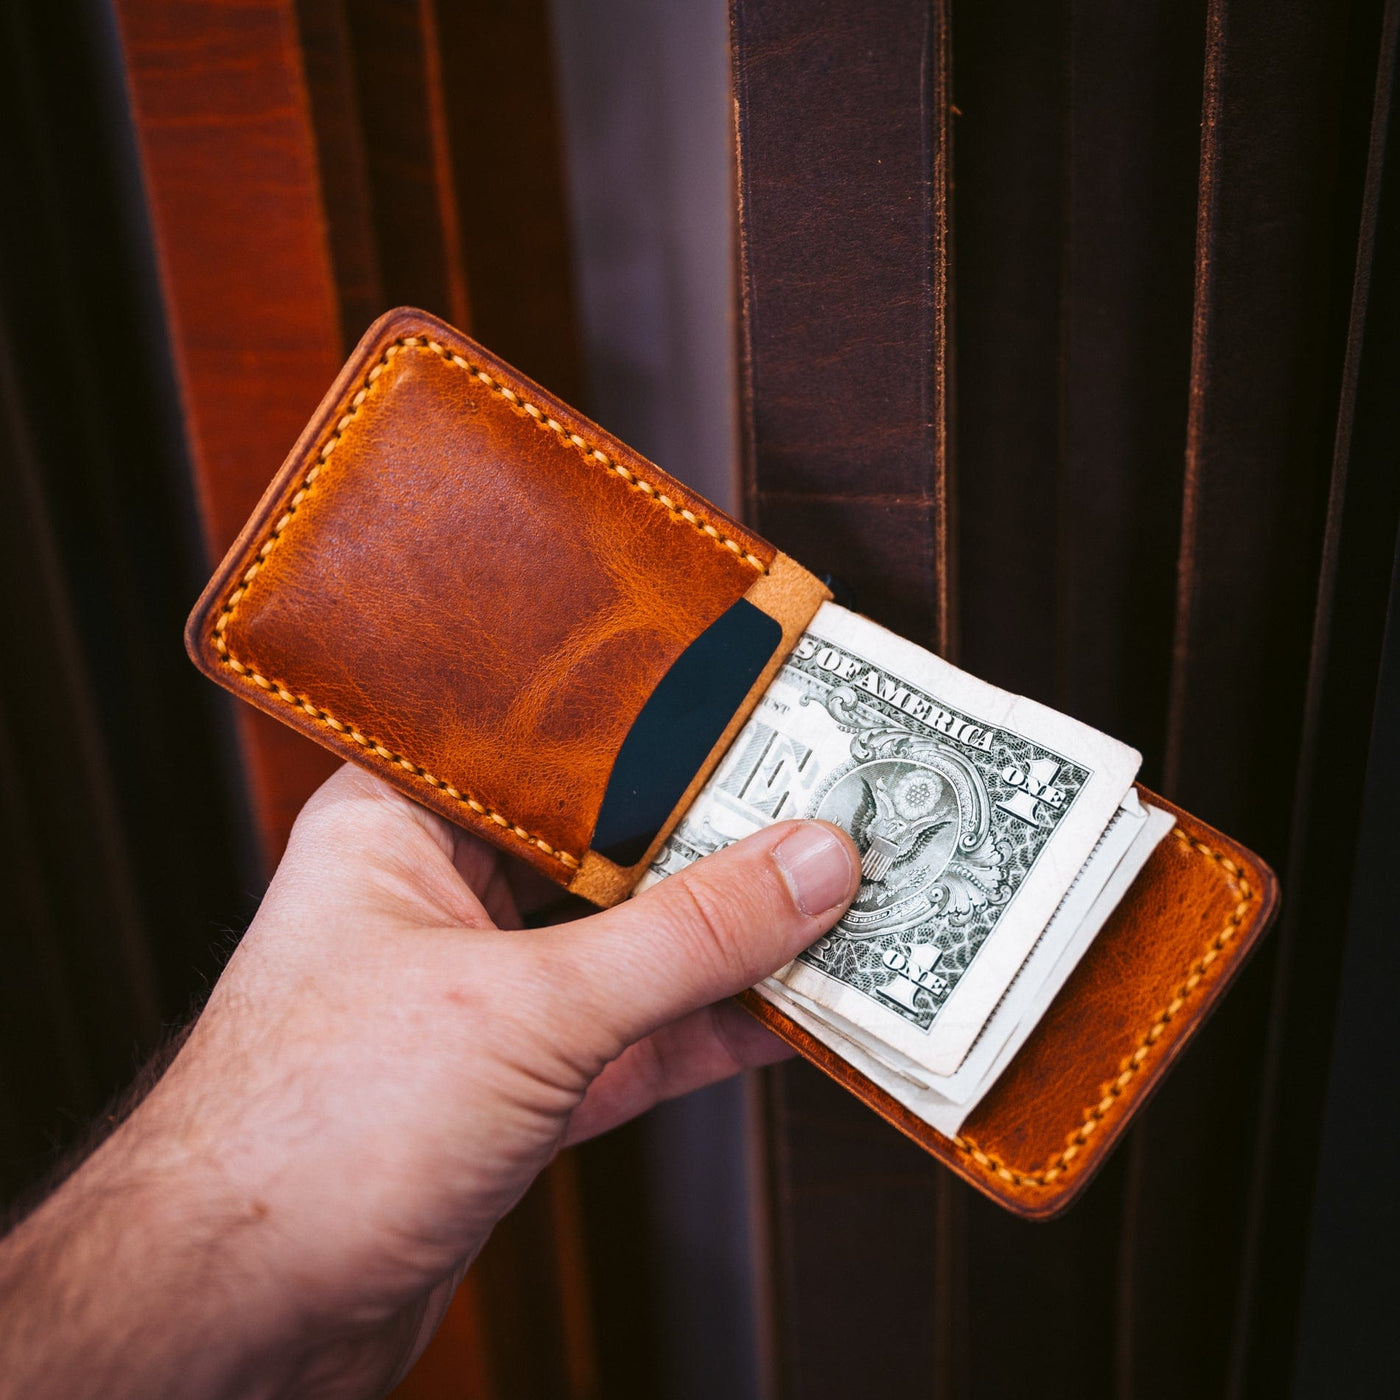 English Tan Money Clip Wallet: Secure Your Cash with Solid Brass Clip -  Popov Leather®